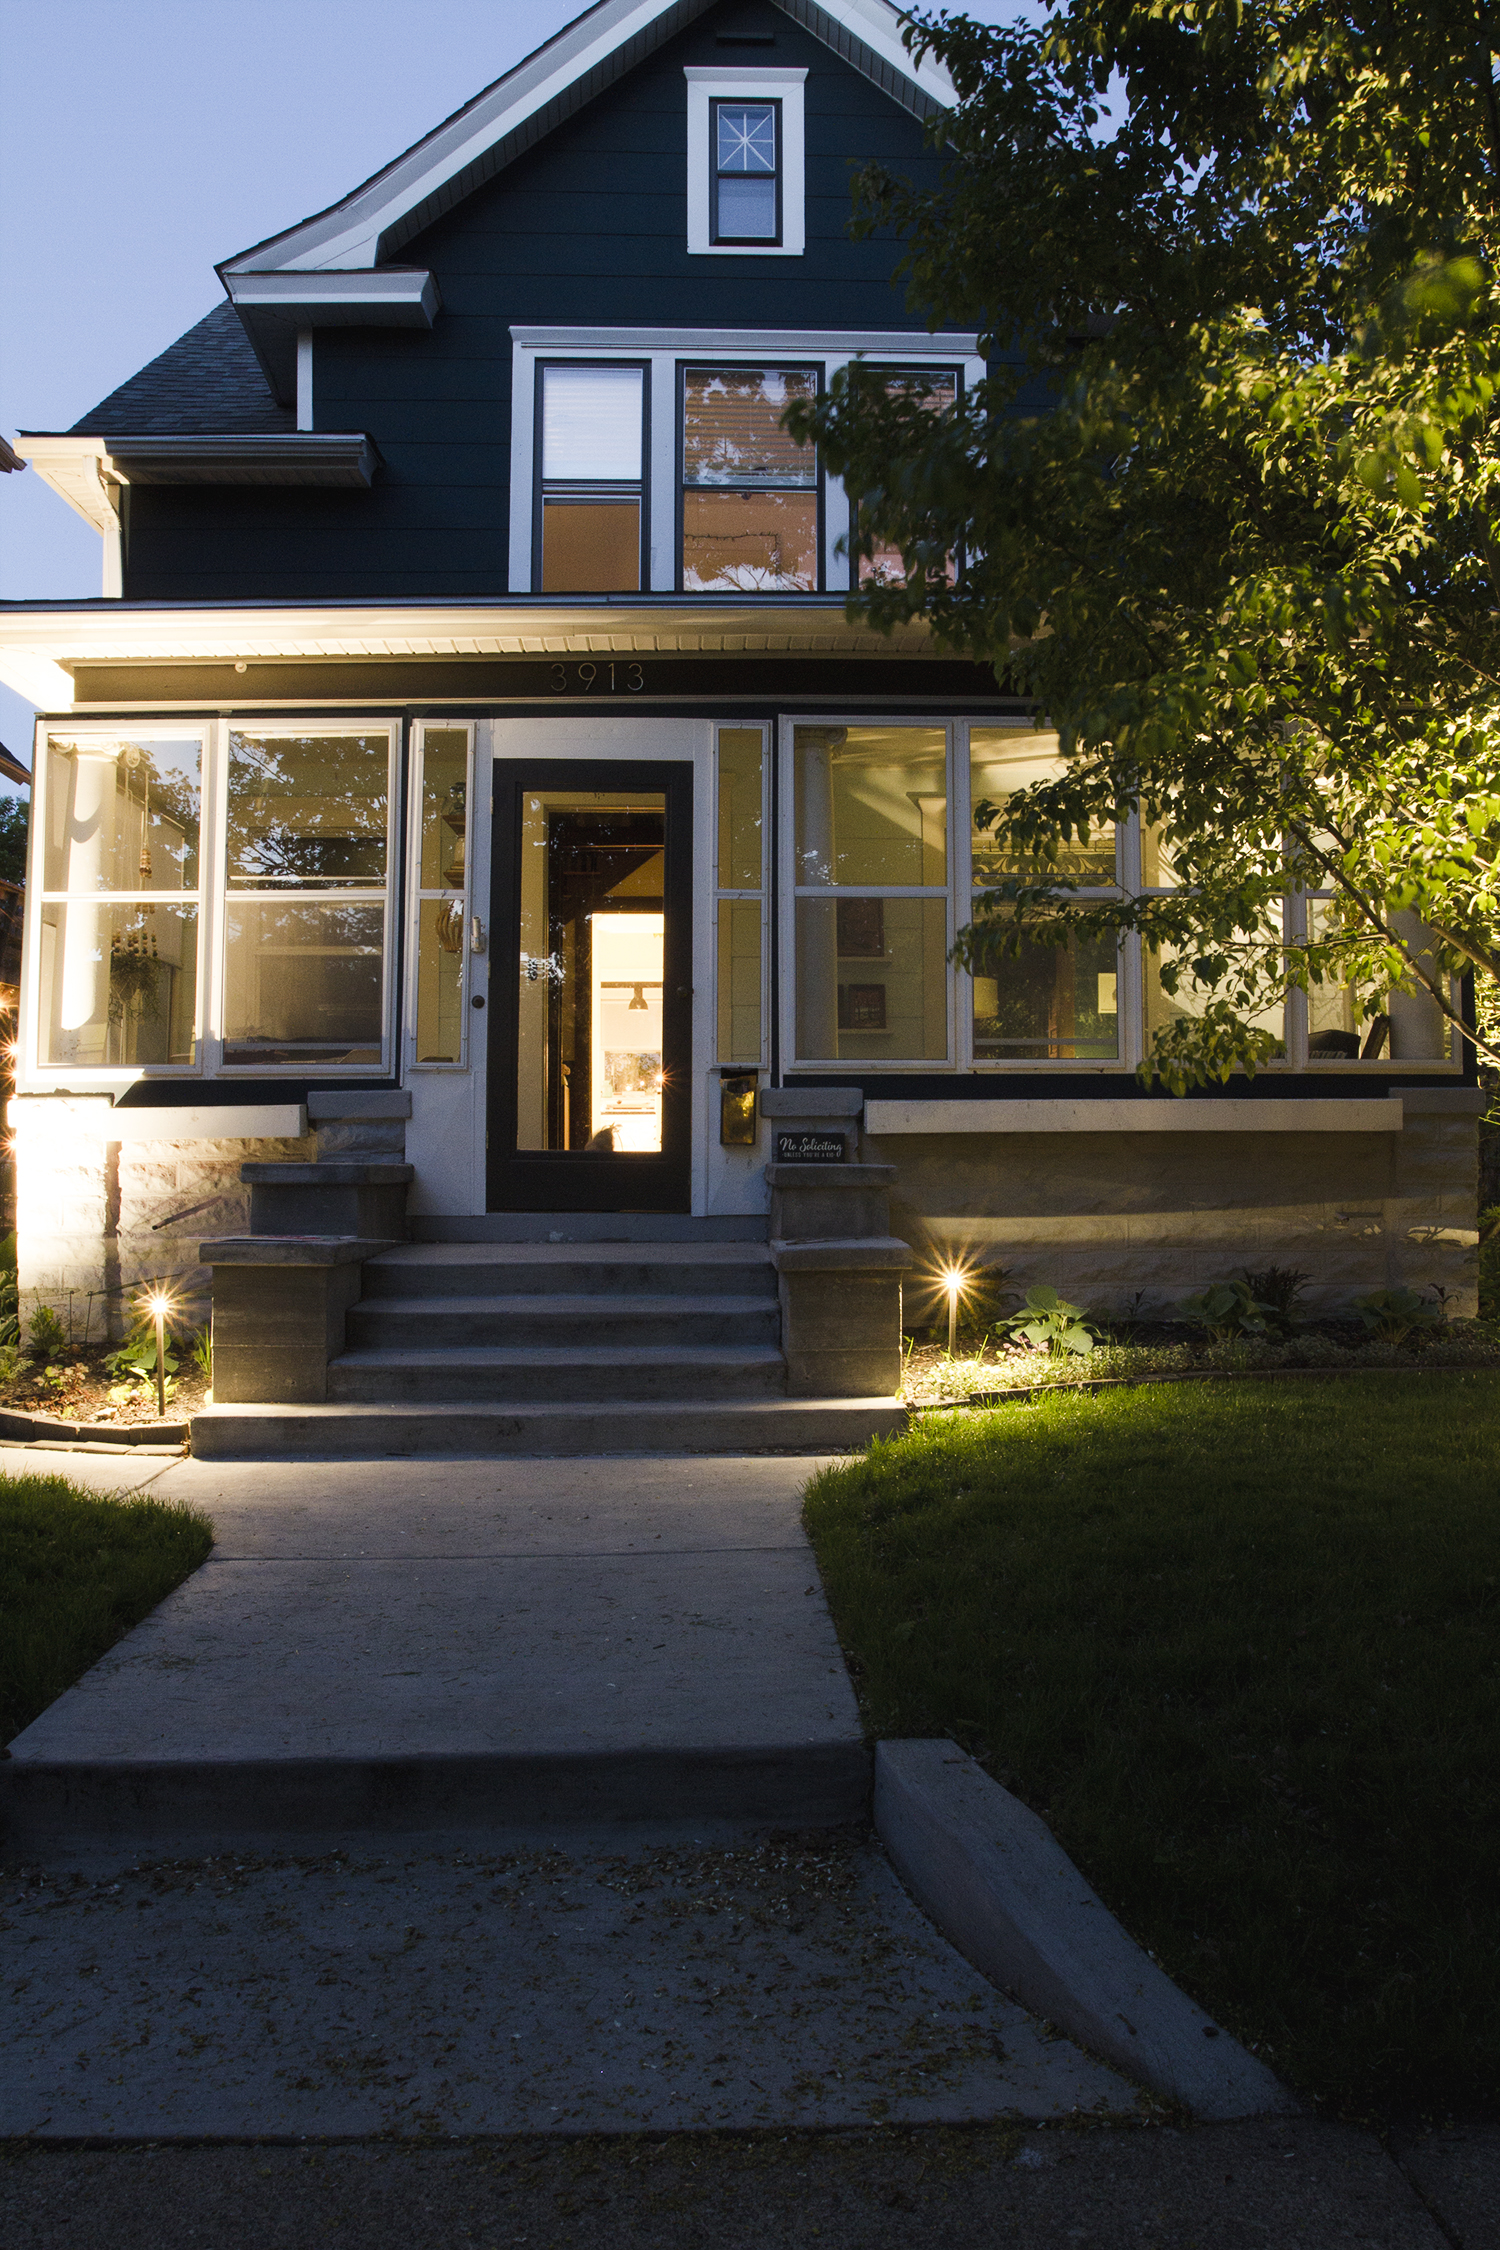 Easy to Install Low Voltage Outdoor Lighting